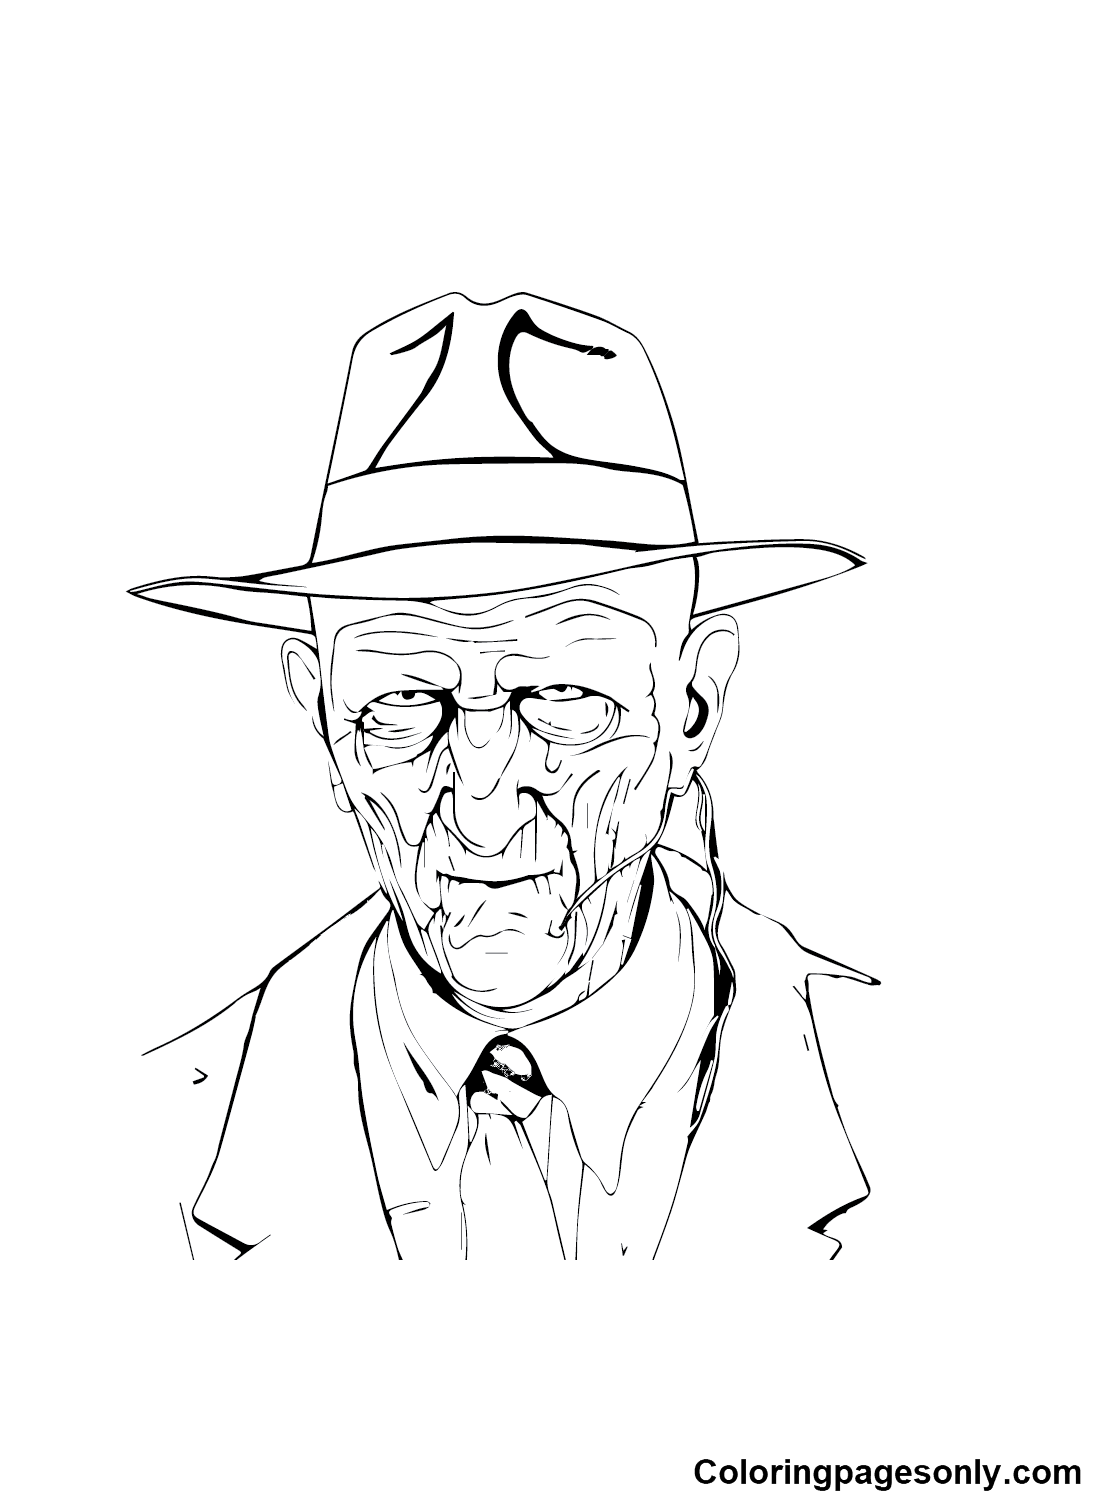 Free Freddy Krueger Coloring Page